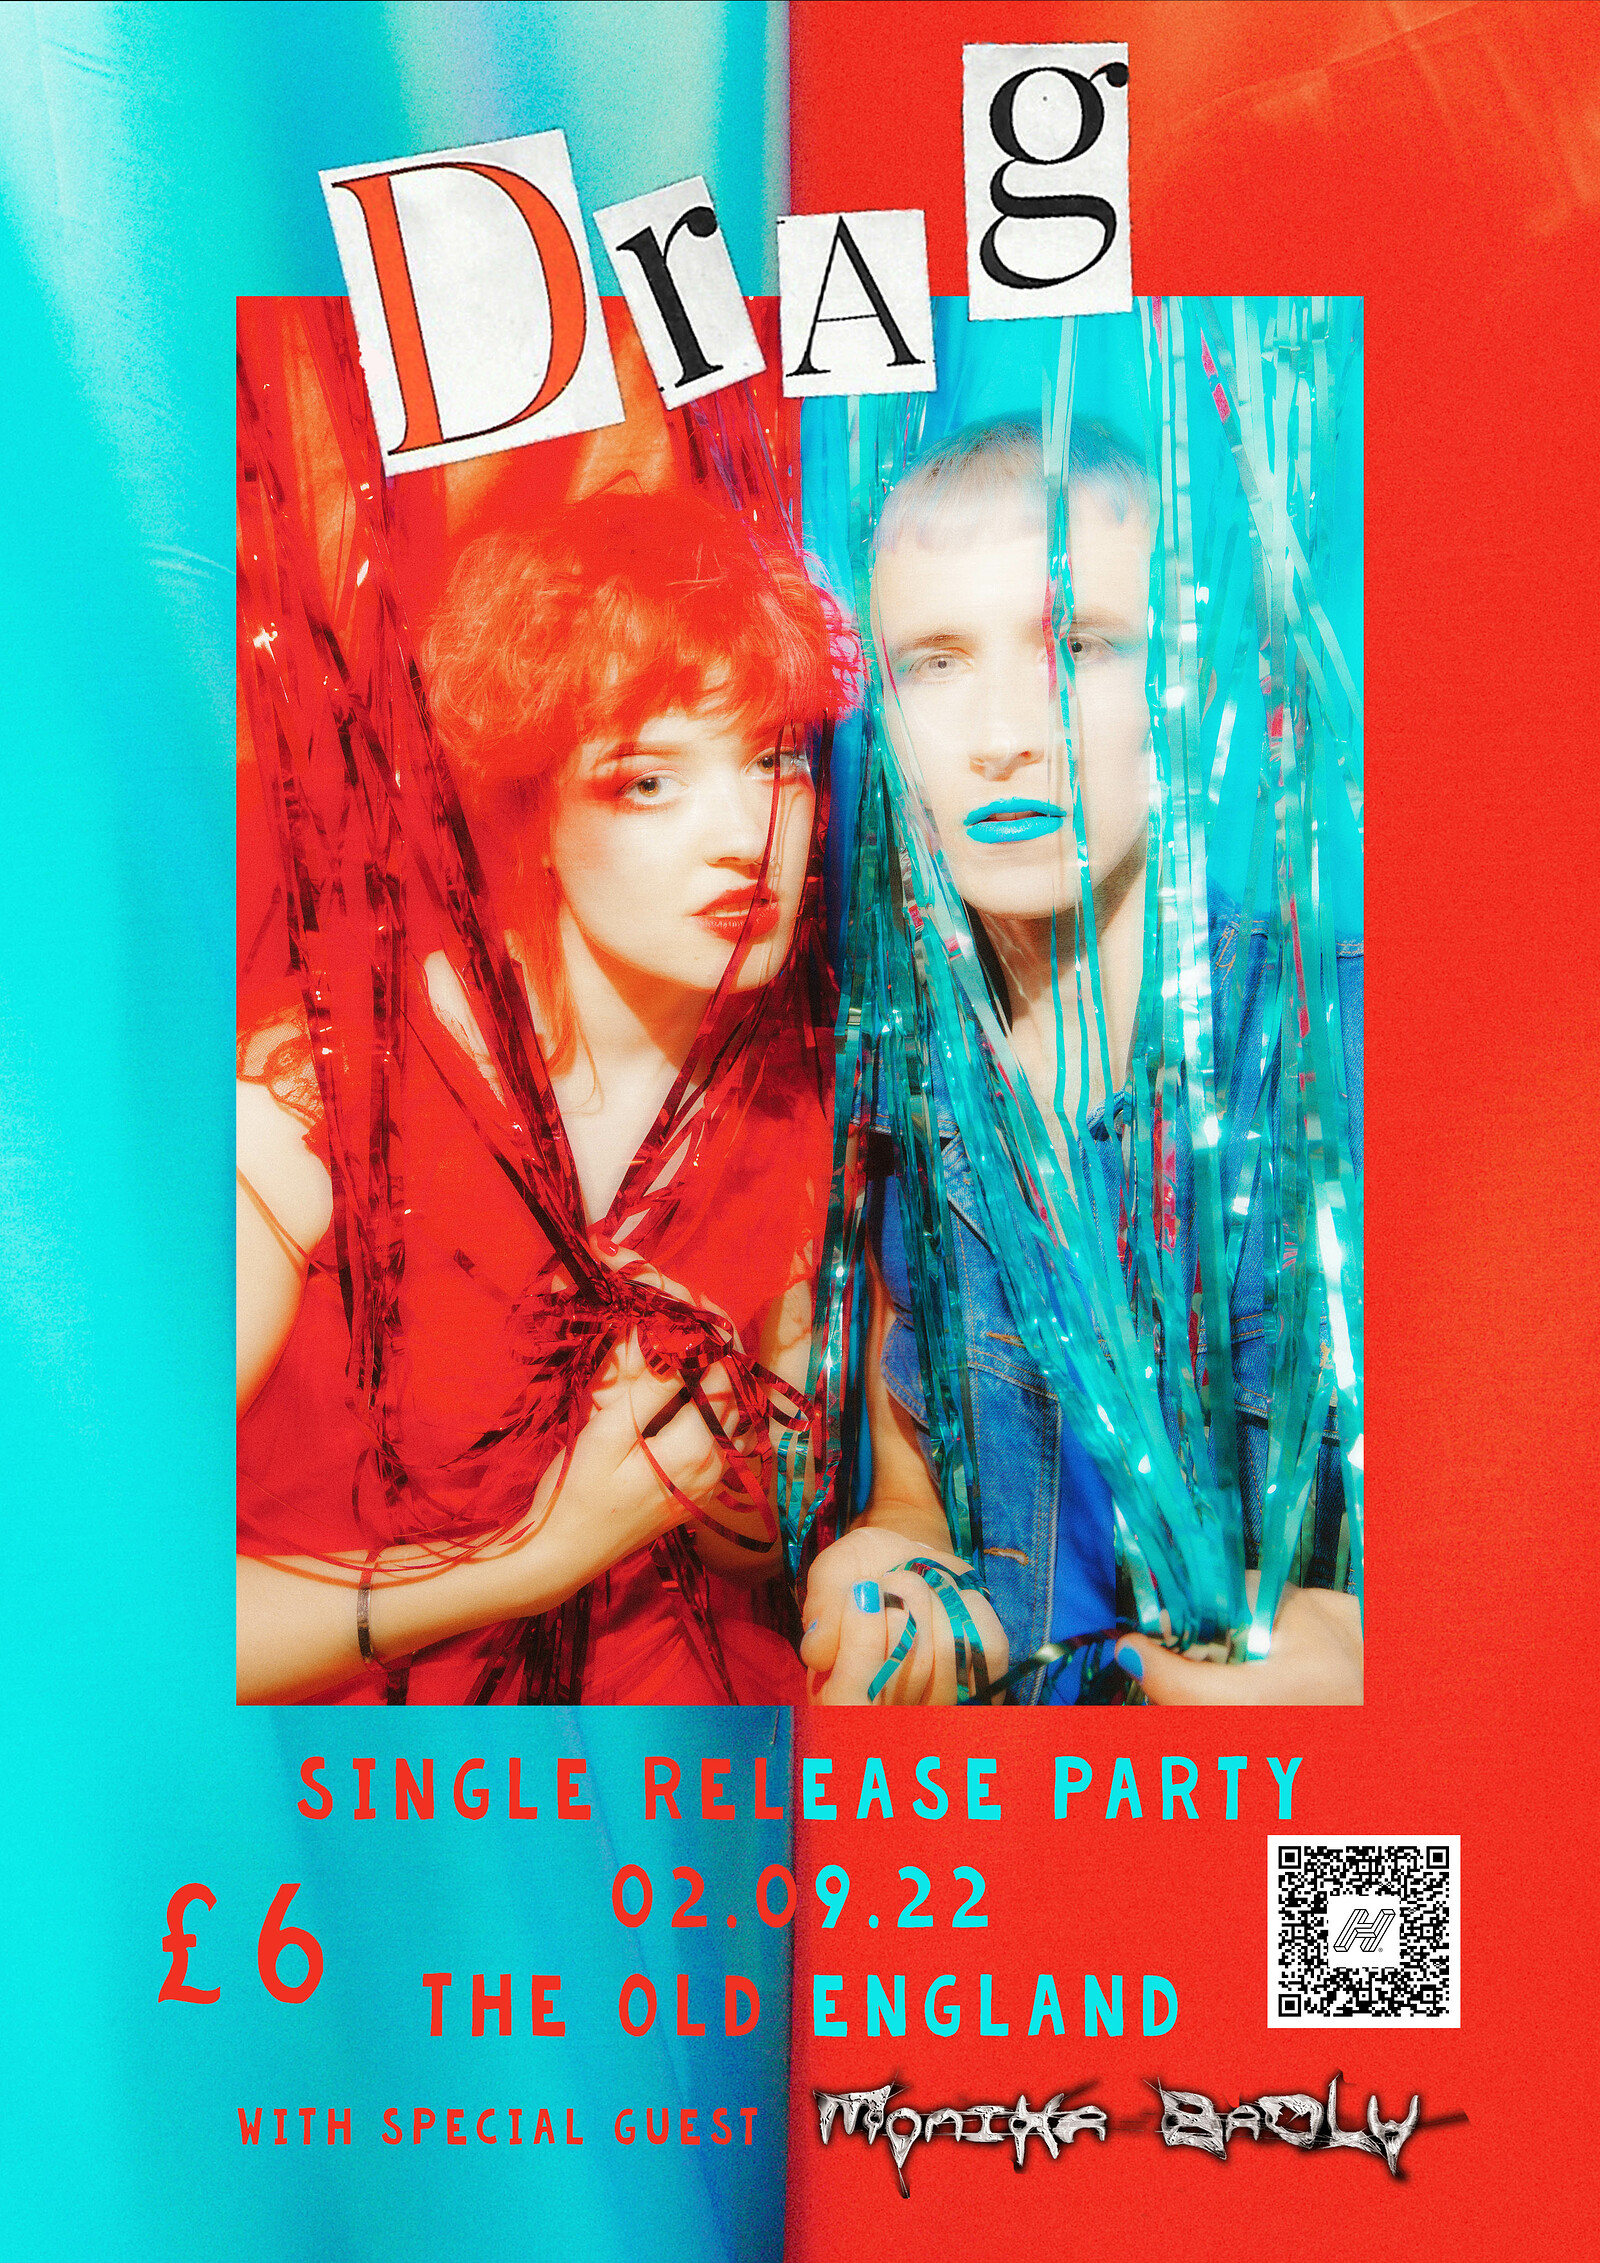 DRAG - Single Release Party at The Old England Pub